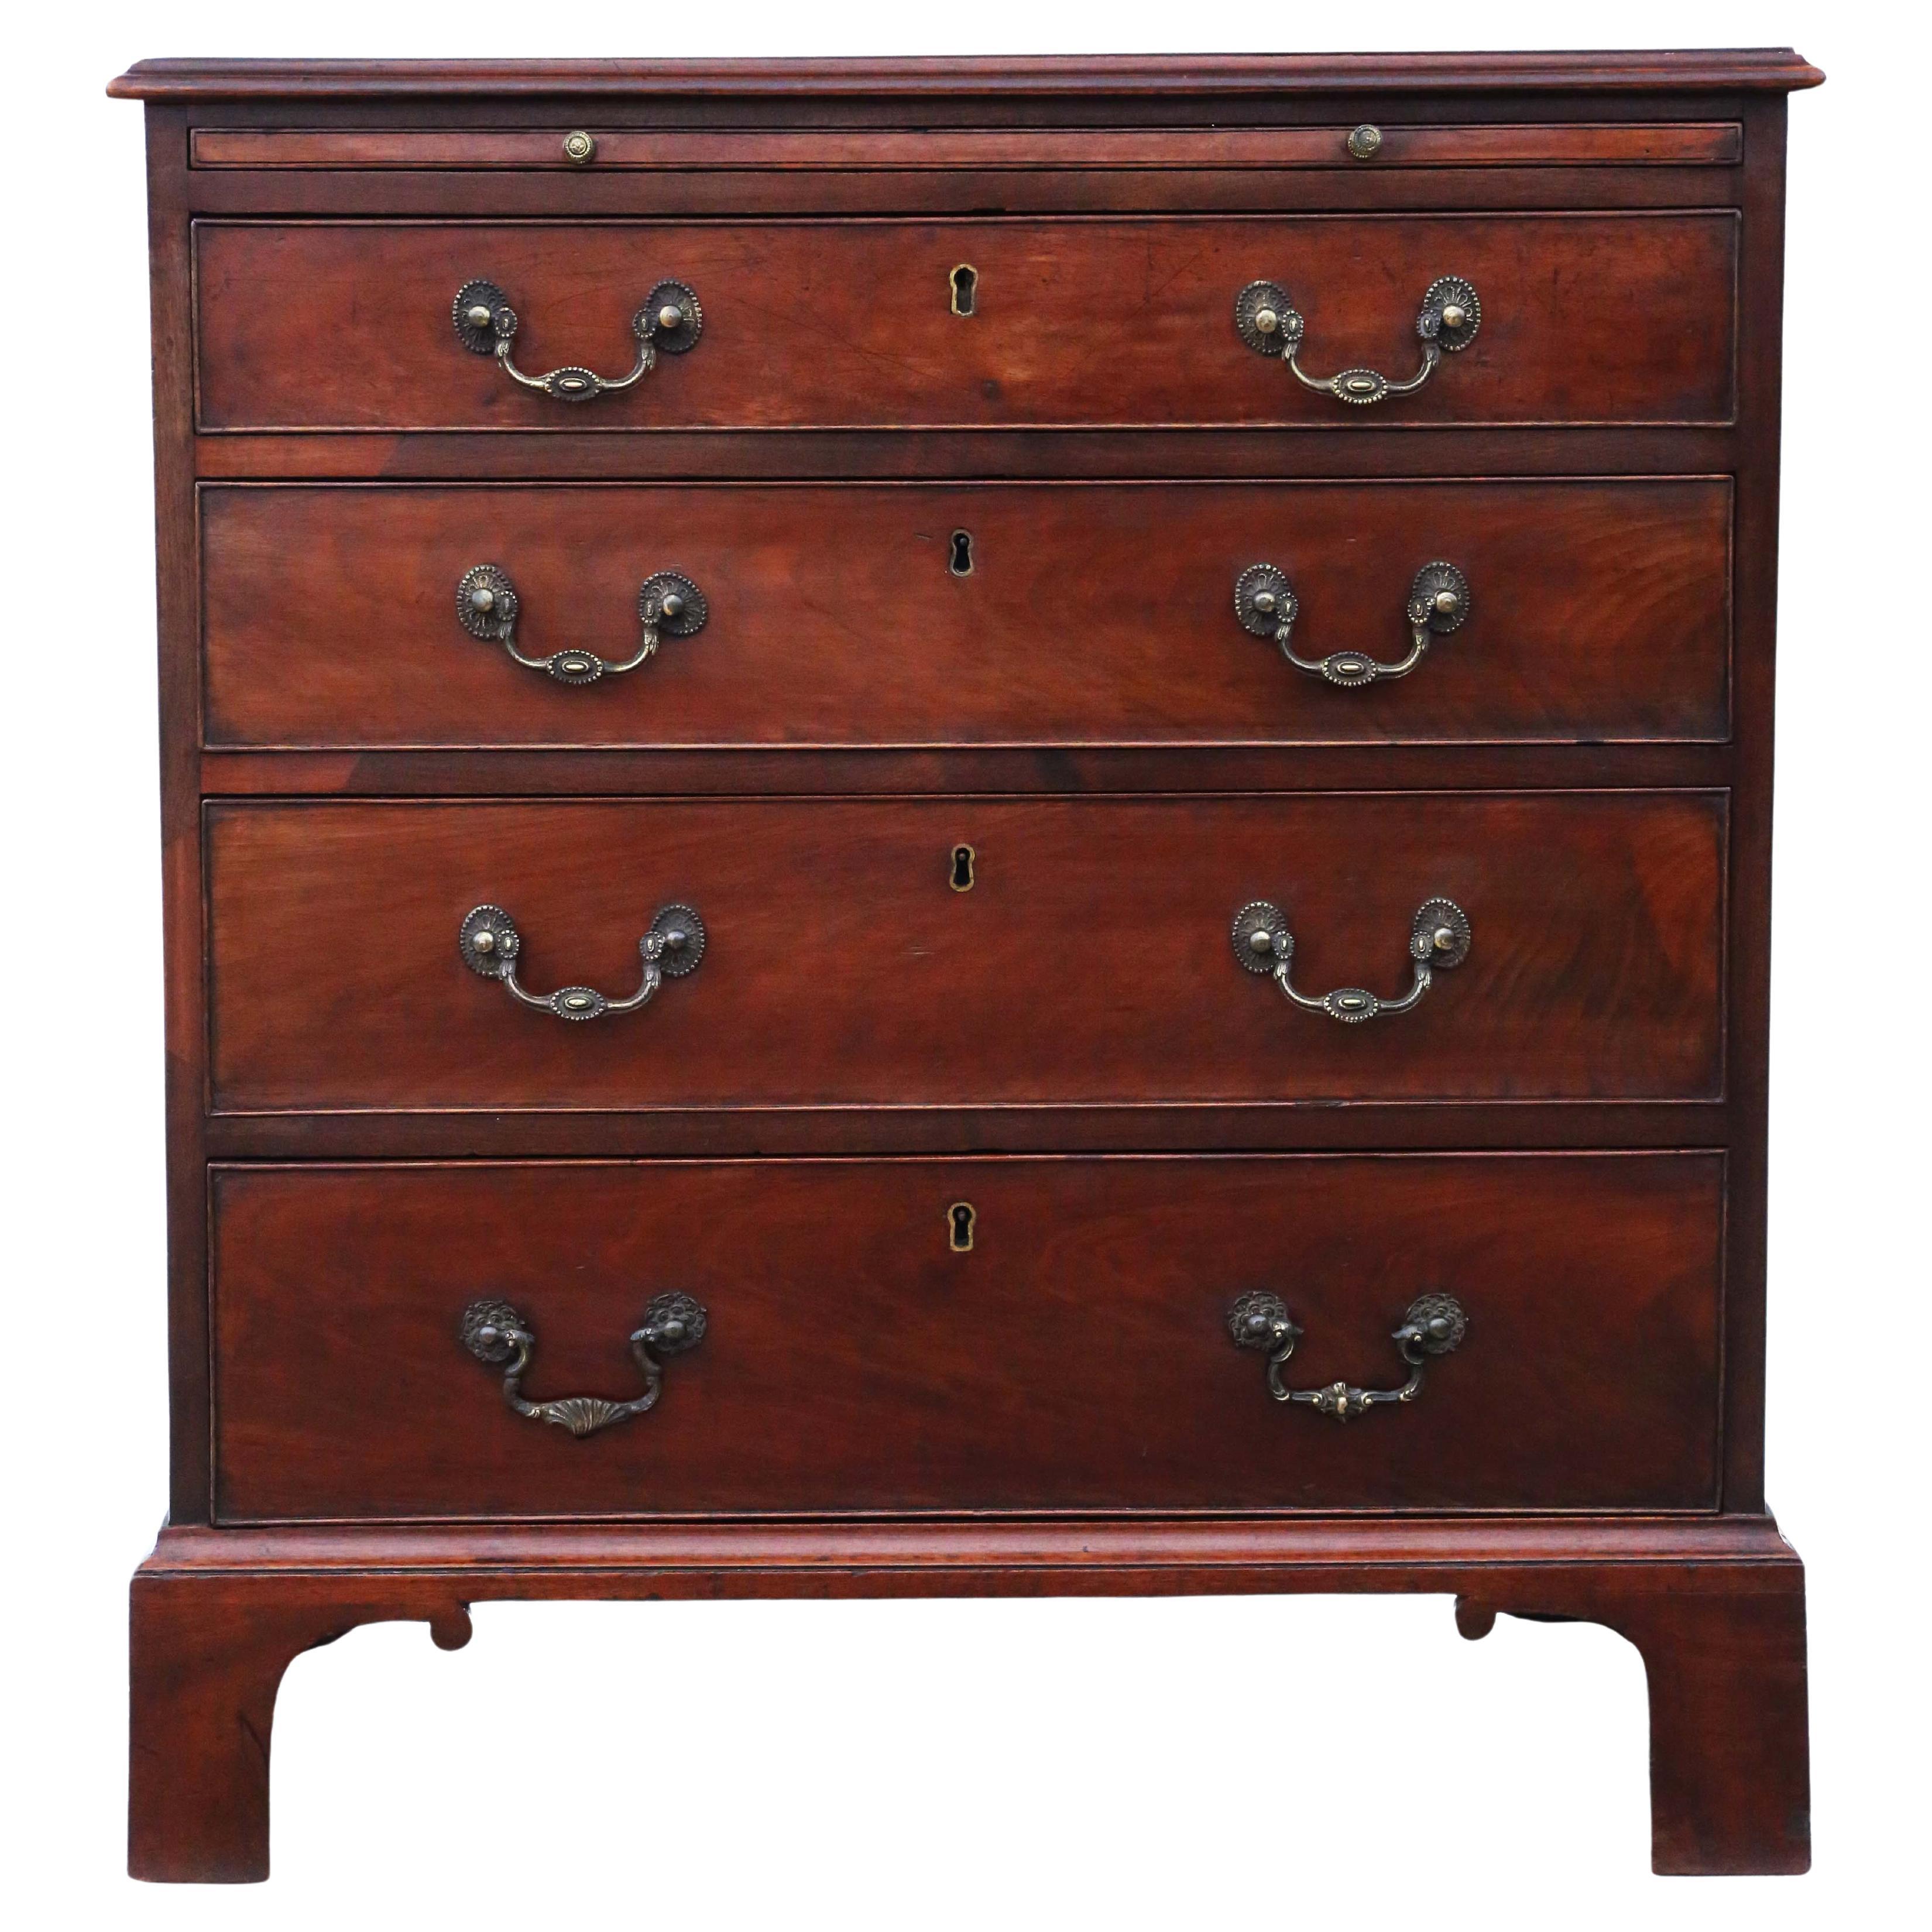 Antique fine quality Georgian 18th Century mahogany batchelors chest of drawers For Sale